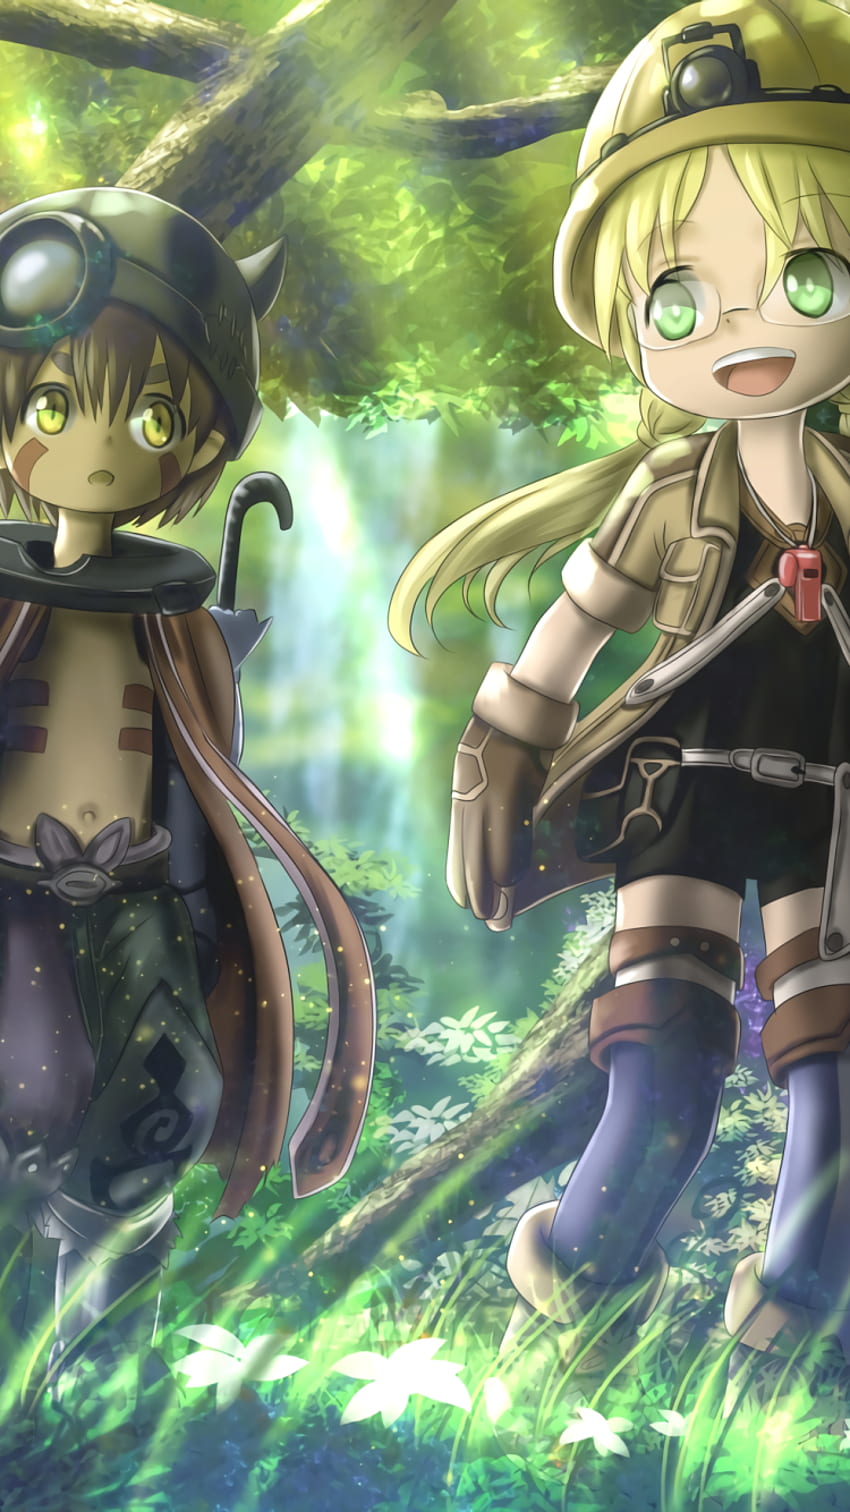 The second volume of the Made in Abyss manga series Chapters 9 The  Depths First Layer The Edge of the Abyss 10 The Depths  Anime Abyss  anime Anime wall art